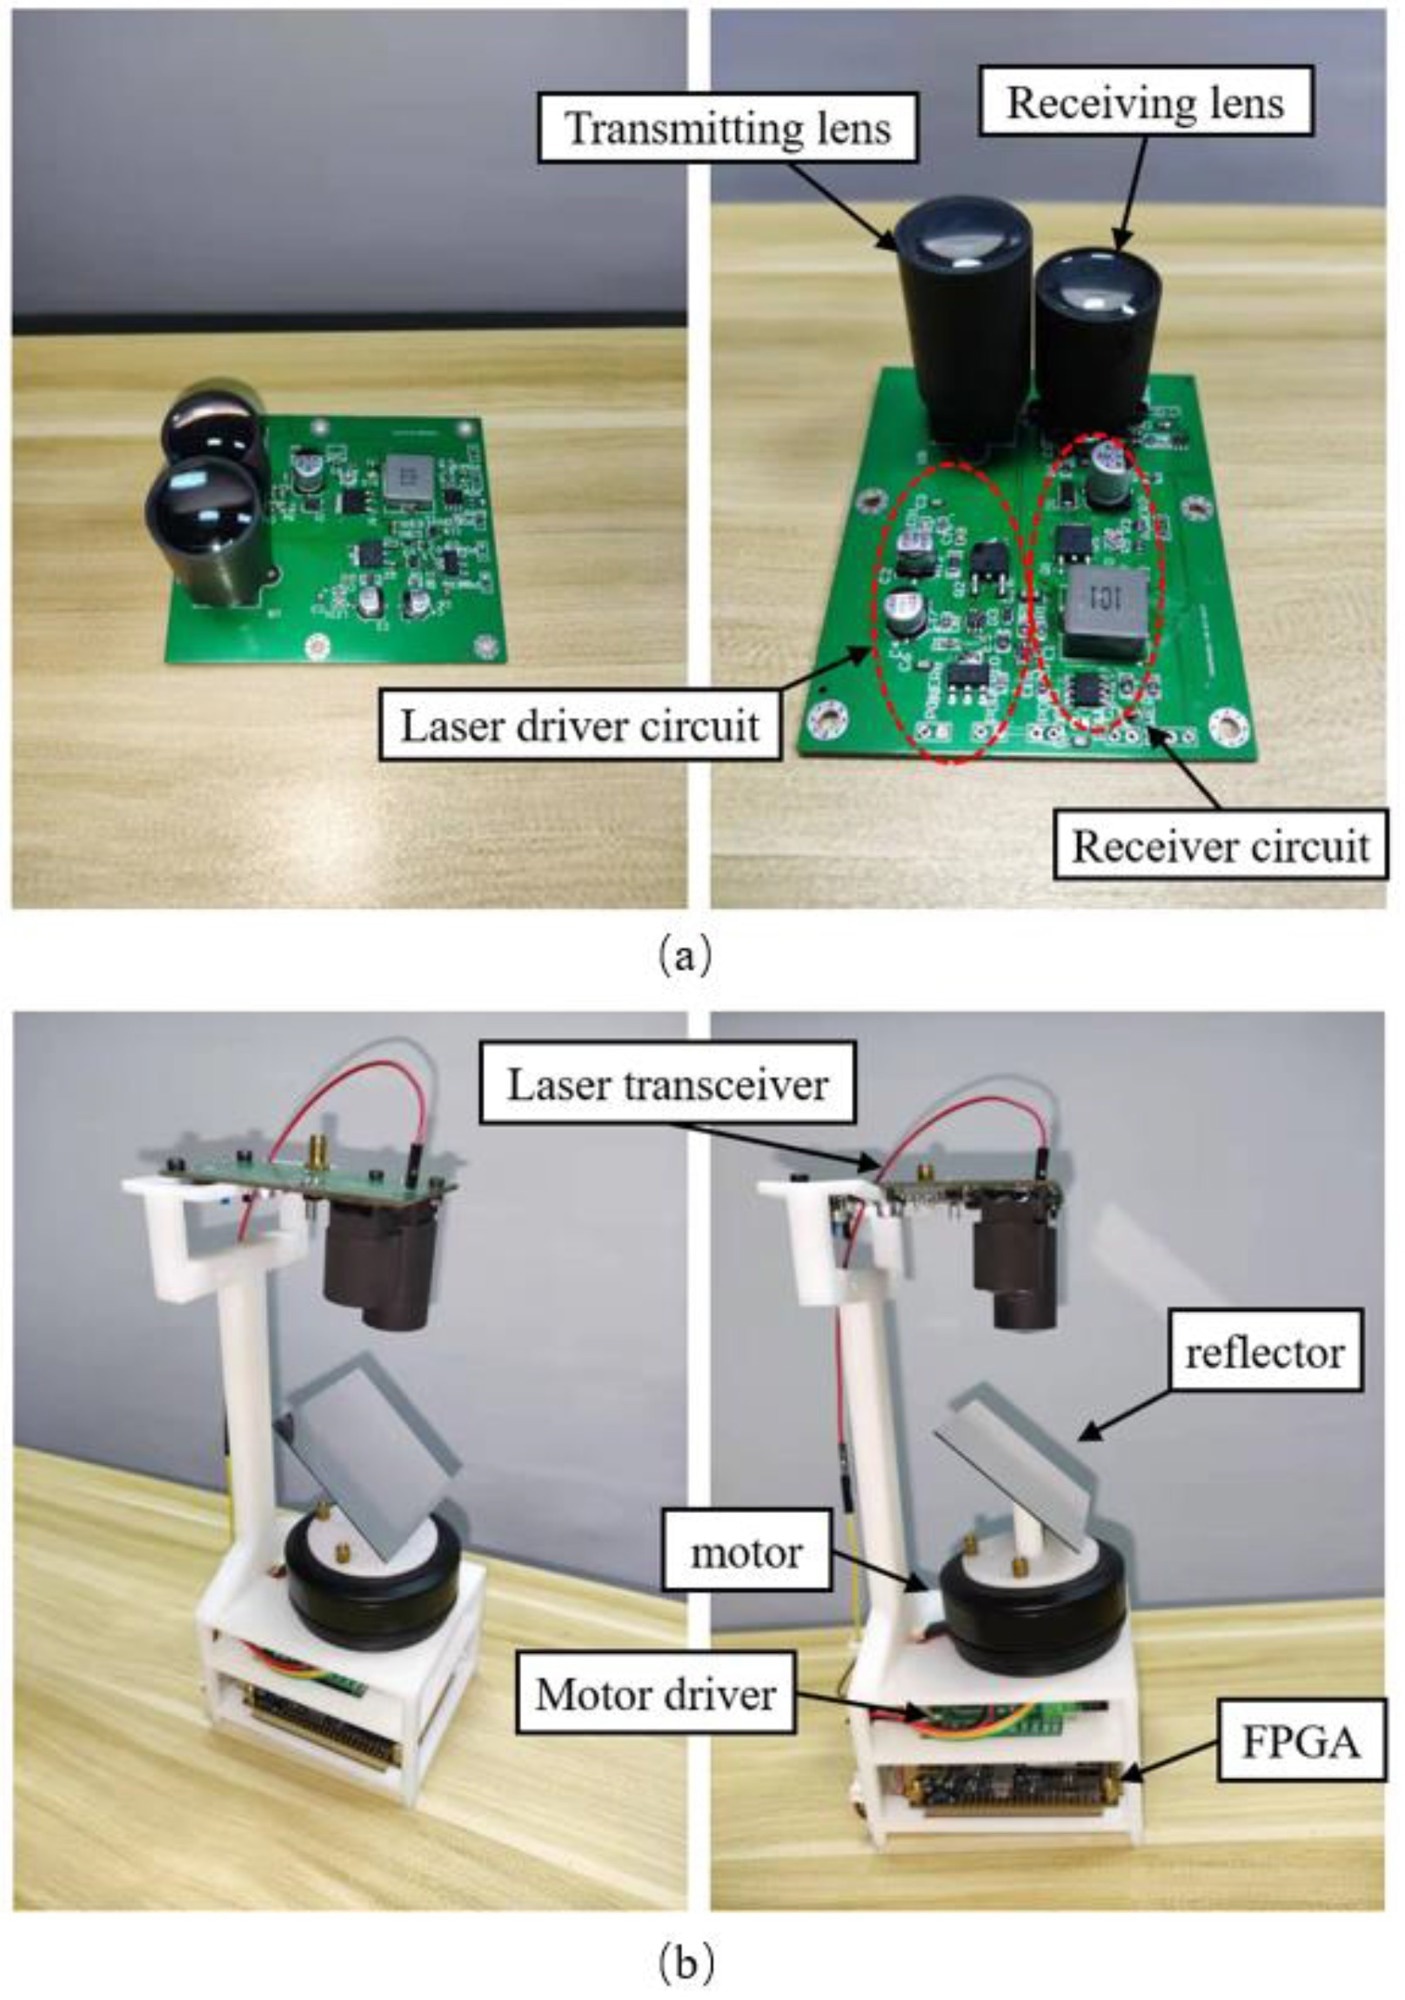 (a) Laser transceiver module. (b) The prototype of the 2-D LiDAR system.